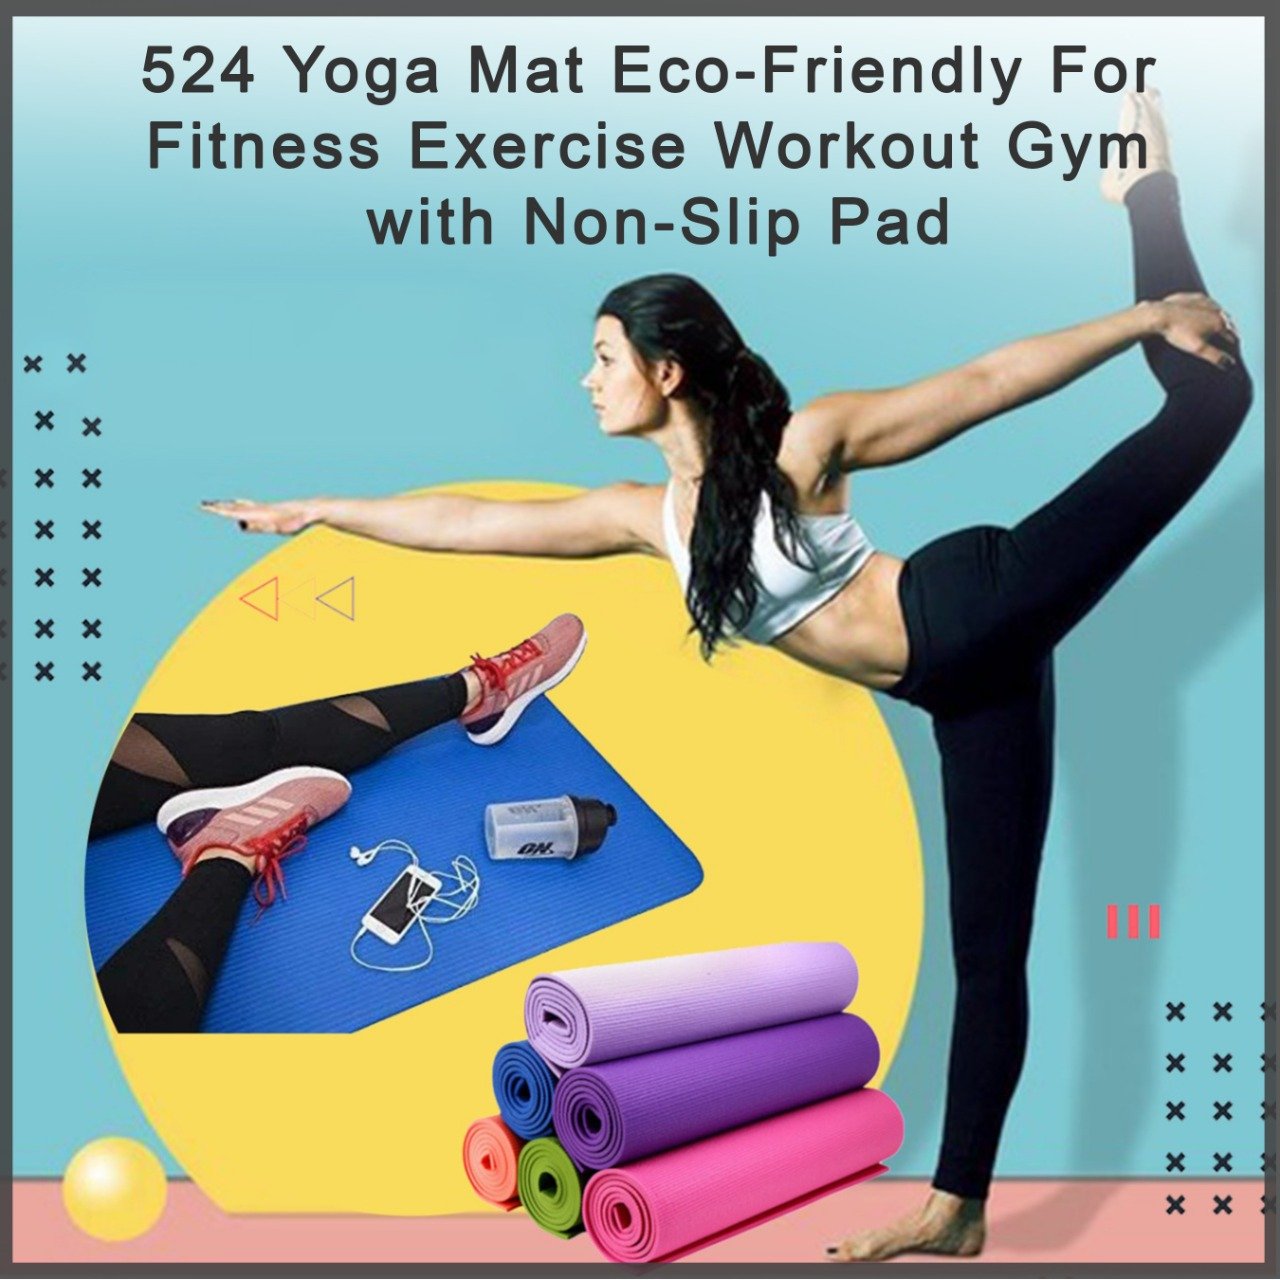 Yoga Mat Eco-Friendly For Fitness Exercise Workout Gym with Non-Slip Pad (180x60xcm) Mix Color